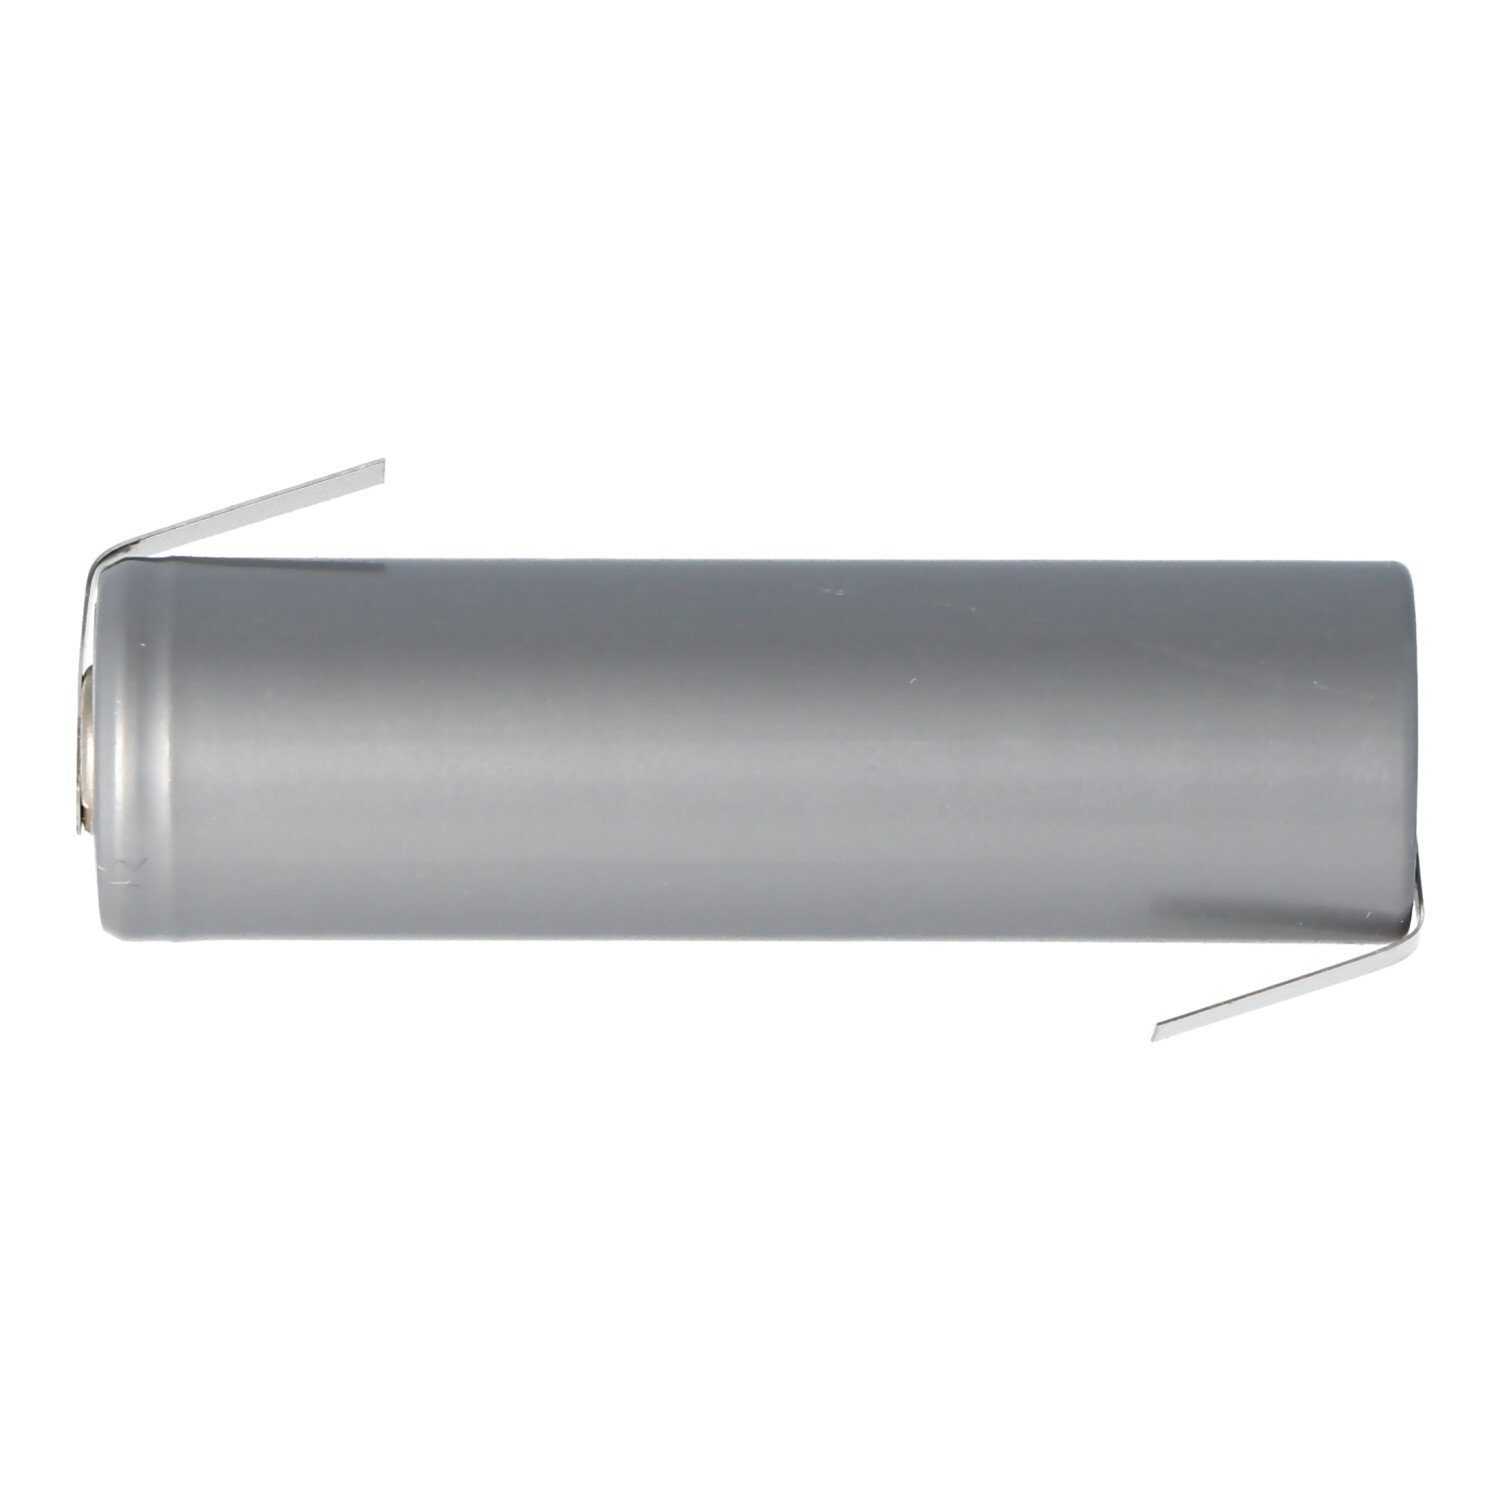 in AA V) Zelle 2100mAh Akku HHR2200 Mignon (1,2 mAh AccuCell mit Z-Form AccuCell 2100 Lötfahne